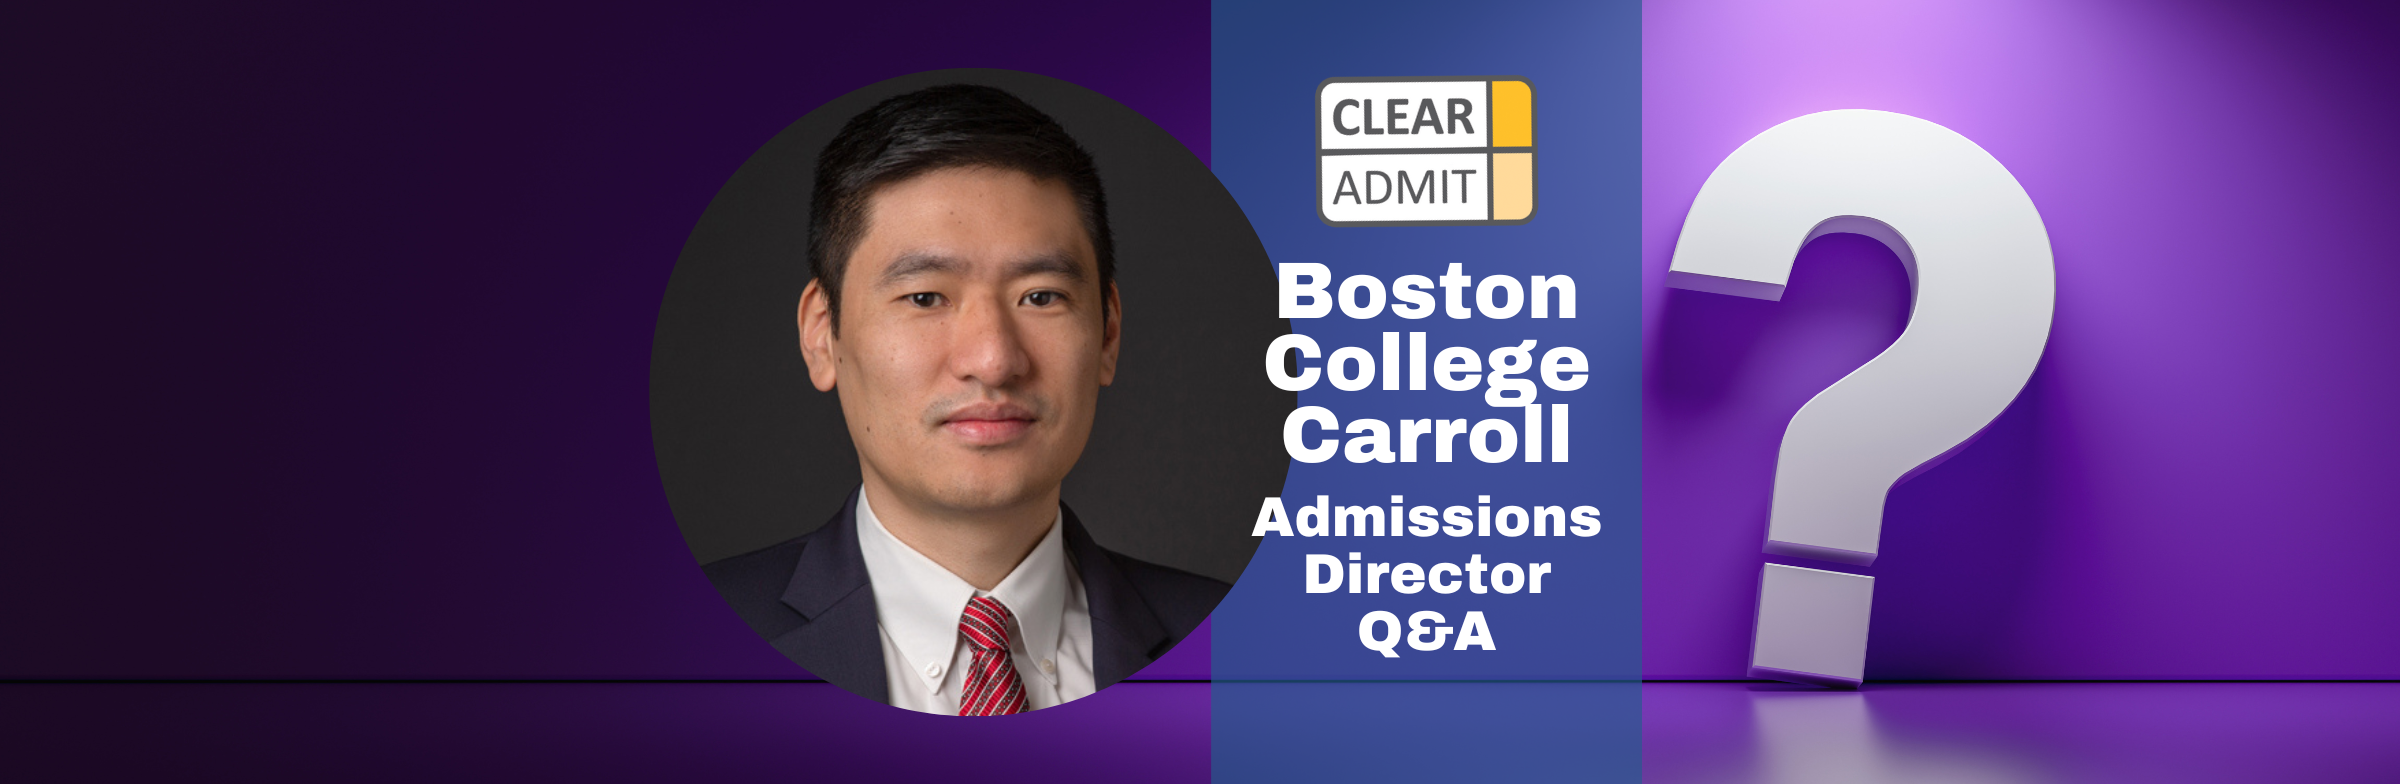 Image for Admissions Director Q&A: Justin Aier of Boston College’s Carroll School of Management